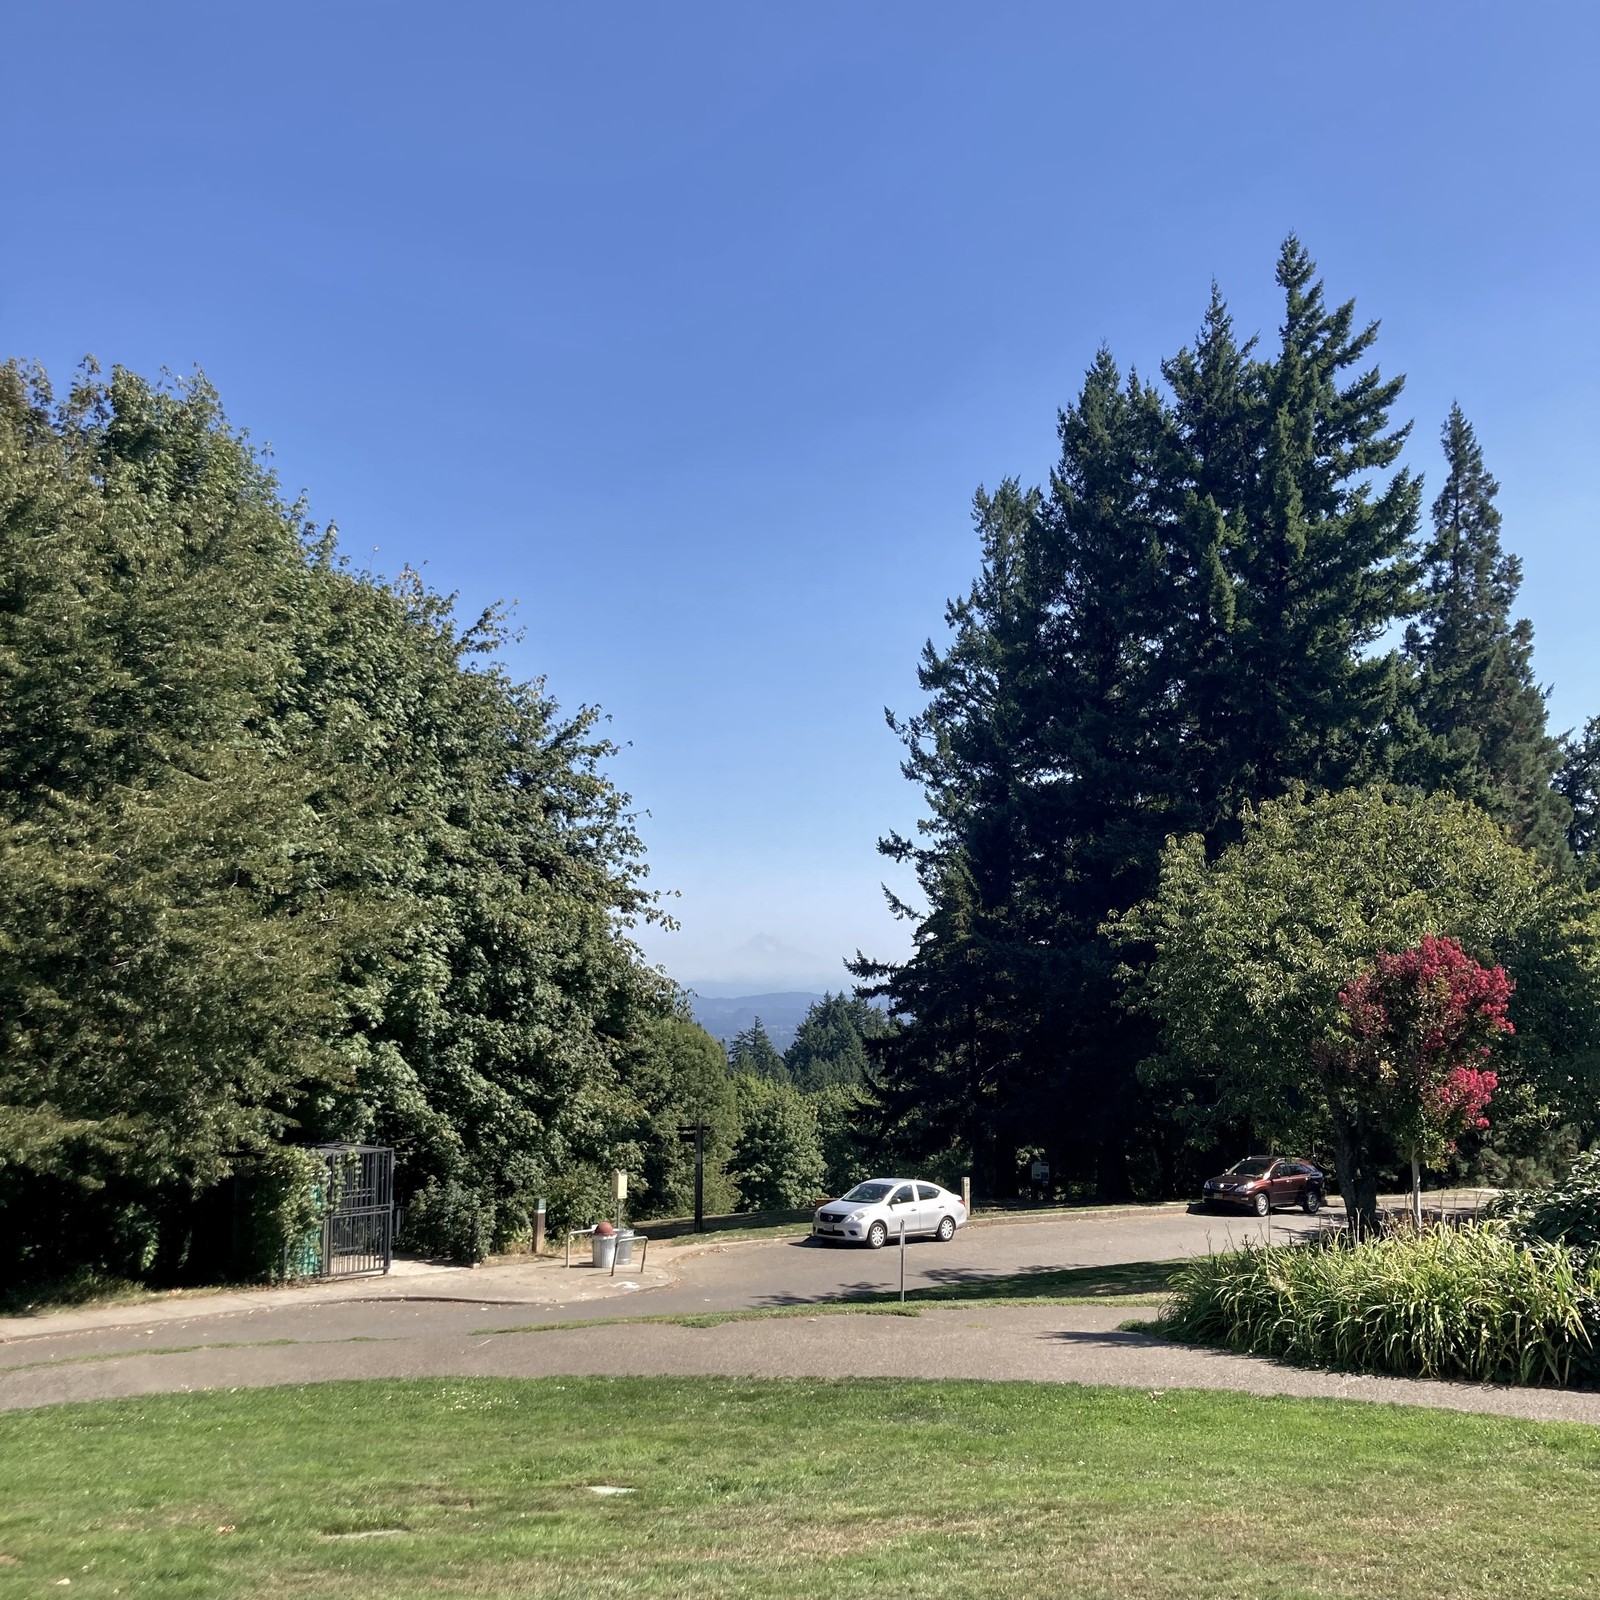 Mt. Hood is only barely visible through a light haze, probably dust and pollution, on this otherwise very clear and hot afternoon